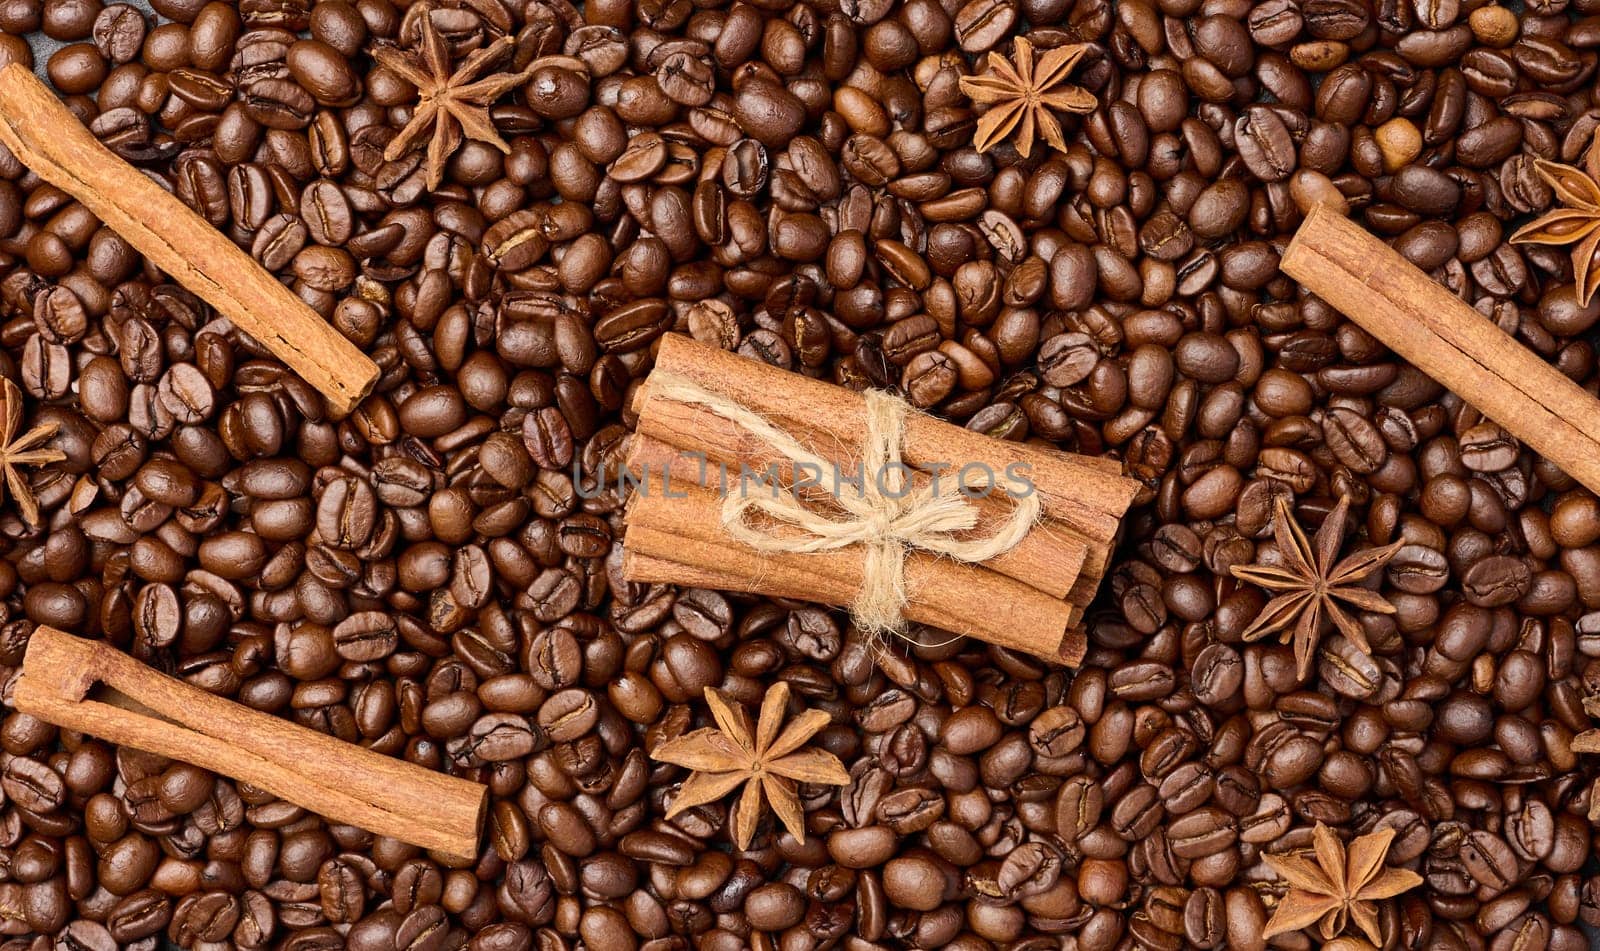 Roasted coffee beans, cinnamon sticks and star anise, full frame by ndanko